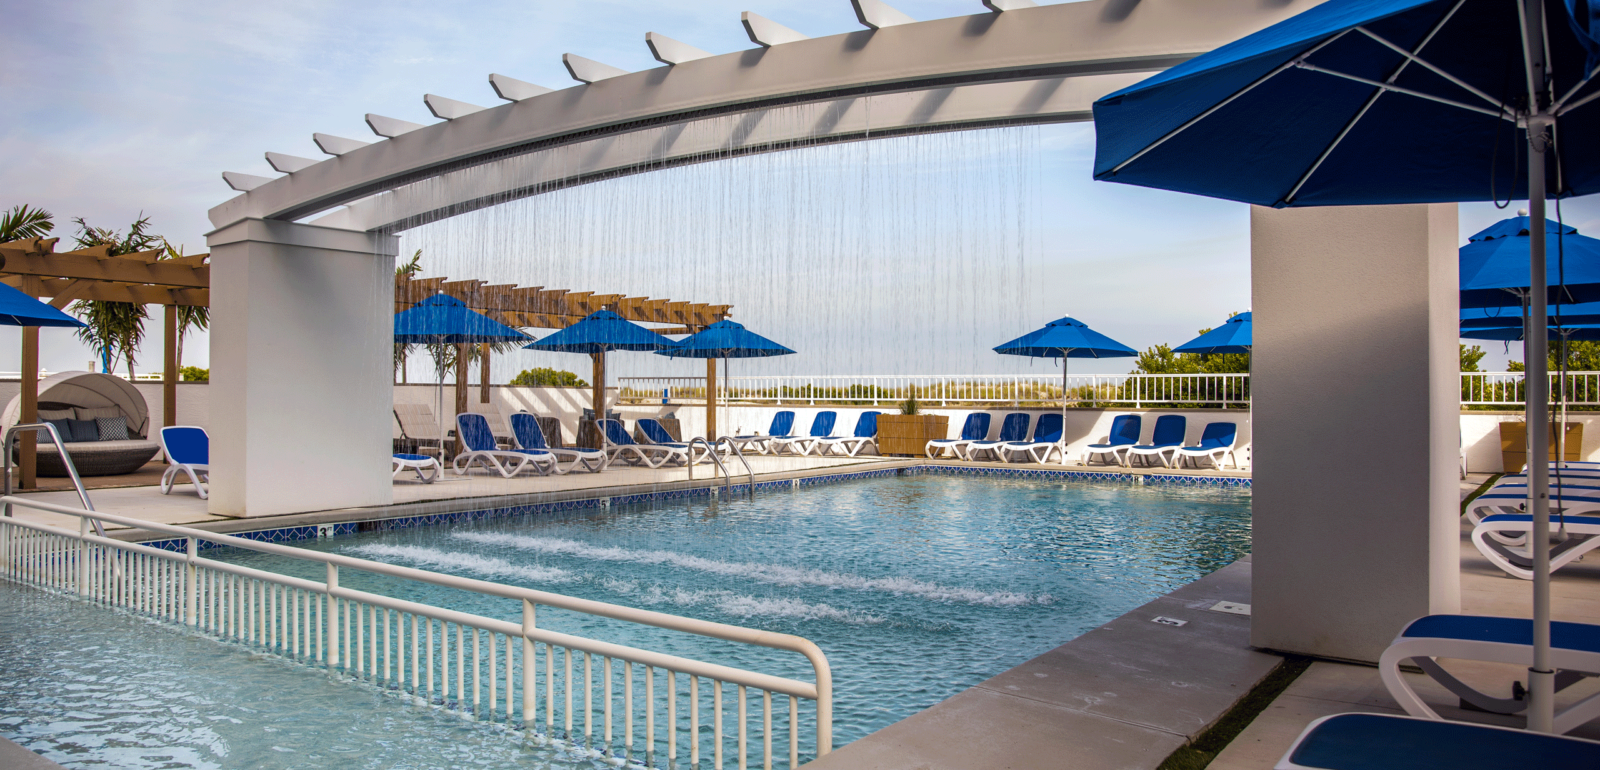 The swimming pool with overhead shower waterfall at our Wildwood Crest hotel